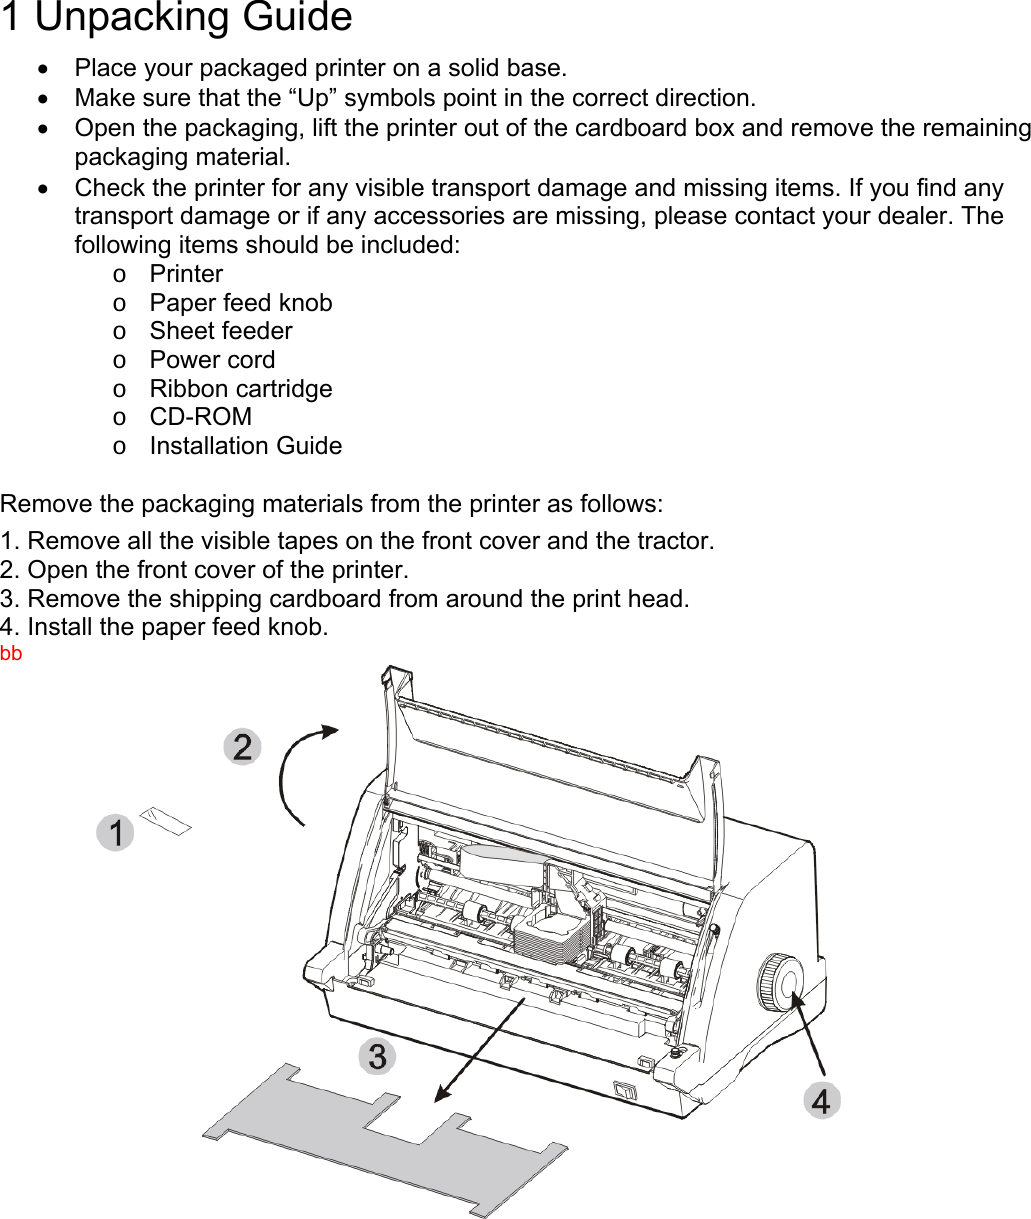    1 Unpacking Guide  •  Place your packaged printer on a solid base. •  Make sure that the “Up” symbols point in the correct direction. •  Open the packaging, lift the printer out of the cardboard box and remove the remaining packaging material. •  Check the printer for any visible transport damage and missing items. If you find any transport damage or if any accessories are missing, please contact your dealer. The following items should be included: o Printer o  Paper feed knob o Sheet feeder o Power cord o Ribbon cartridge o CD-ROM o Installation Guide  Remove the packaging materials from the printer as follows: 1. Remove all the visible tapes on the front cover and the tractor. 2. Open the front cover of the printer. 3. Remove the shipping cardboard from around the print head. 4. Install the paper feed knob. bb  